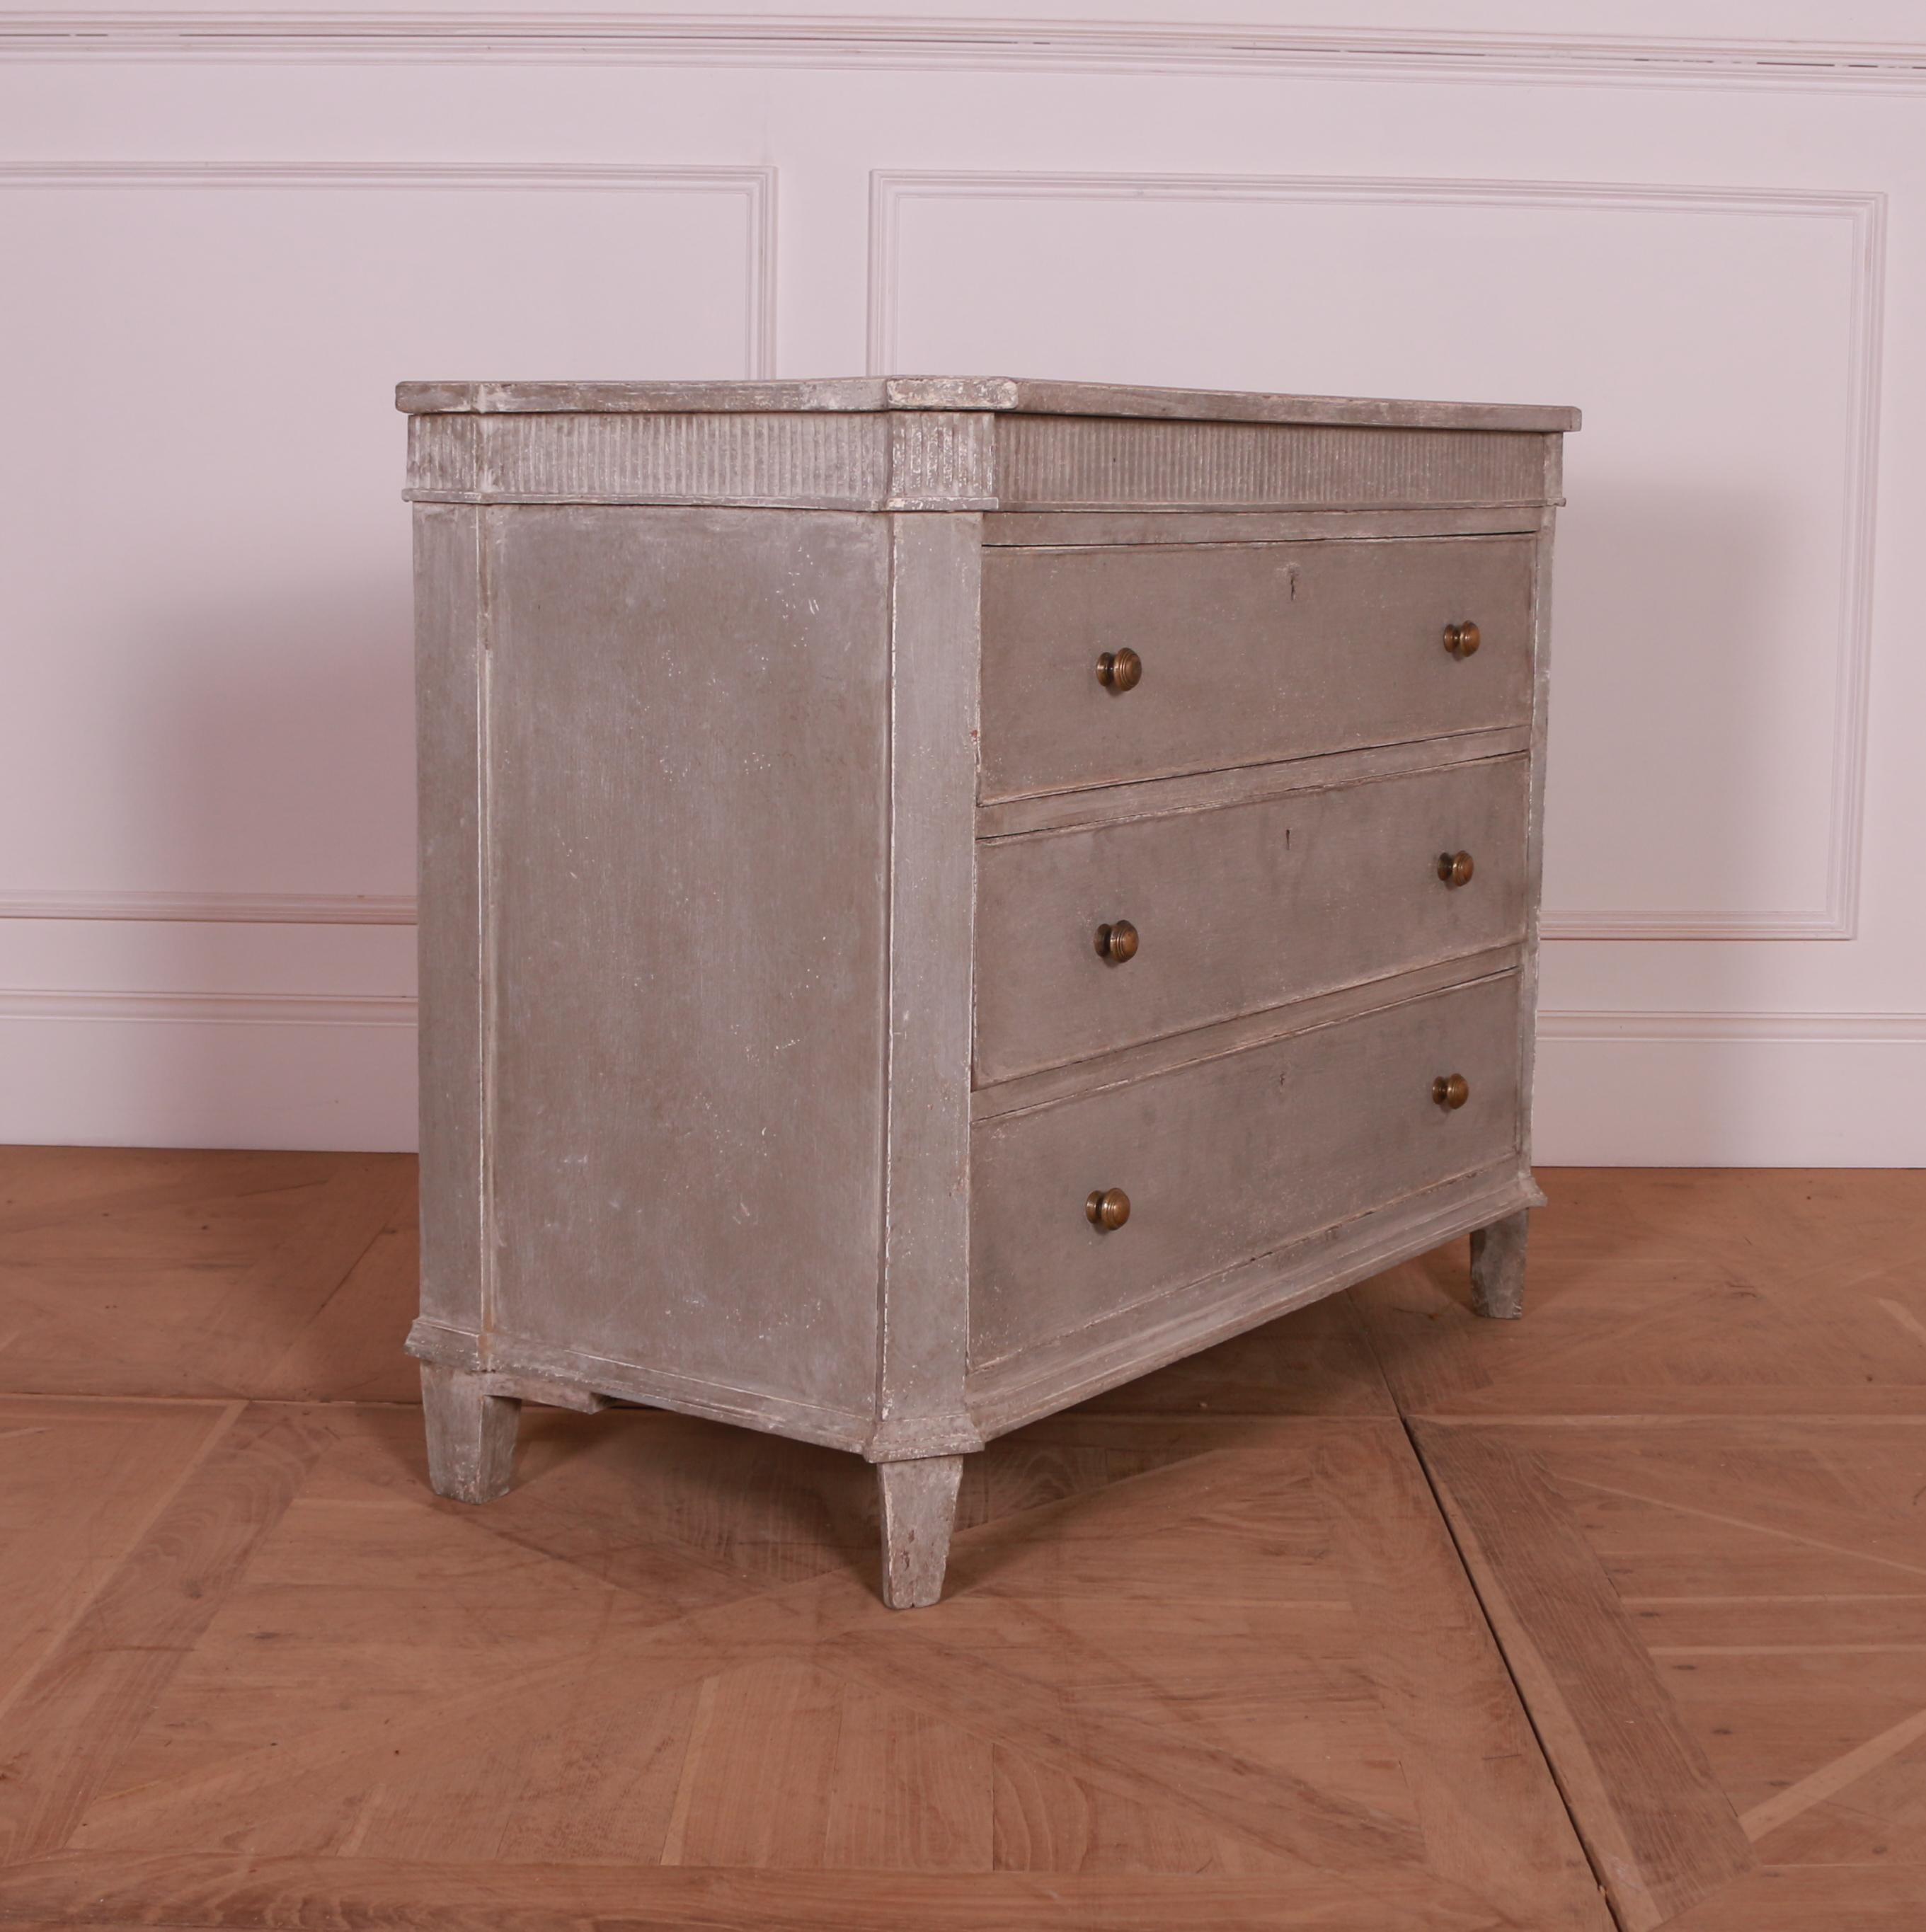 Small 19th C Swedish 4 drawer painted pine commode with fluted decoration. 1880.

Reference: 7600

Dimensions
40 inches (102 cms) wide
19 inches (48 cms) deep
32 inches (81 cms) high.